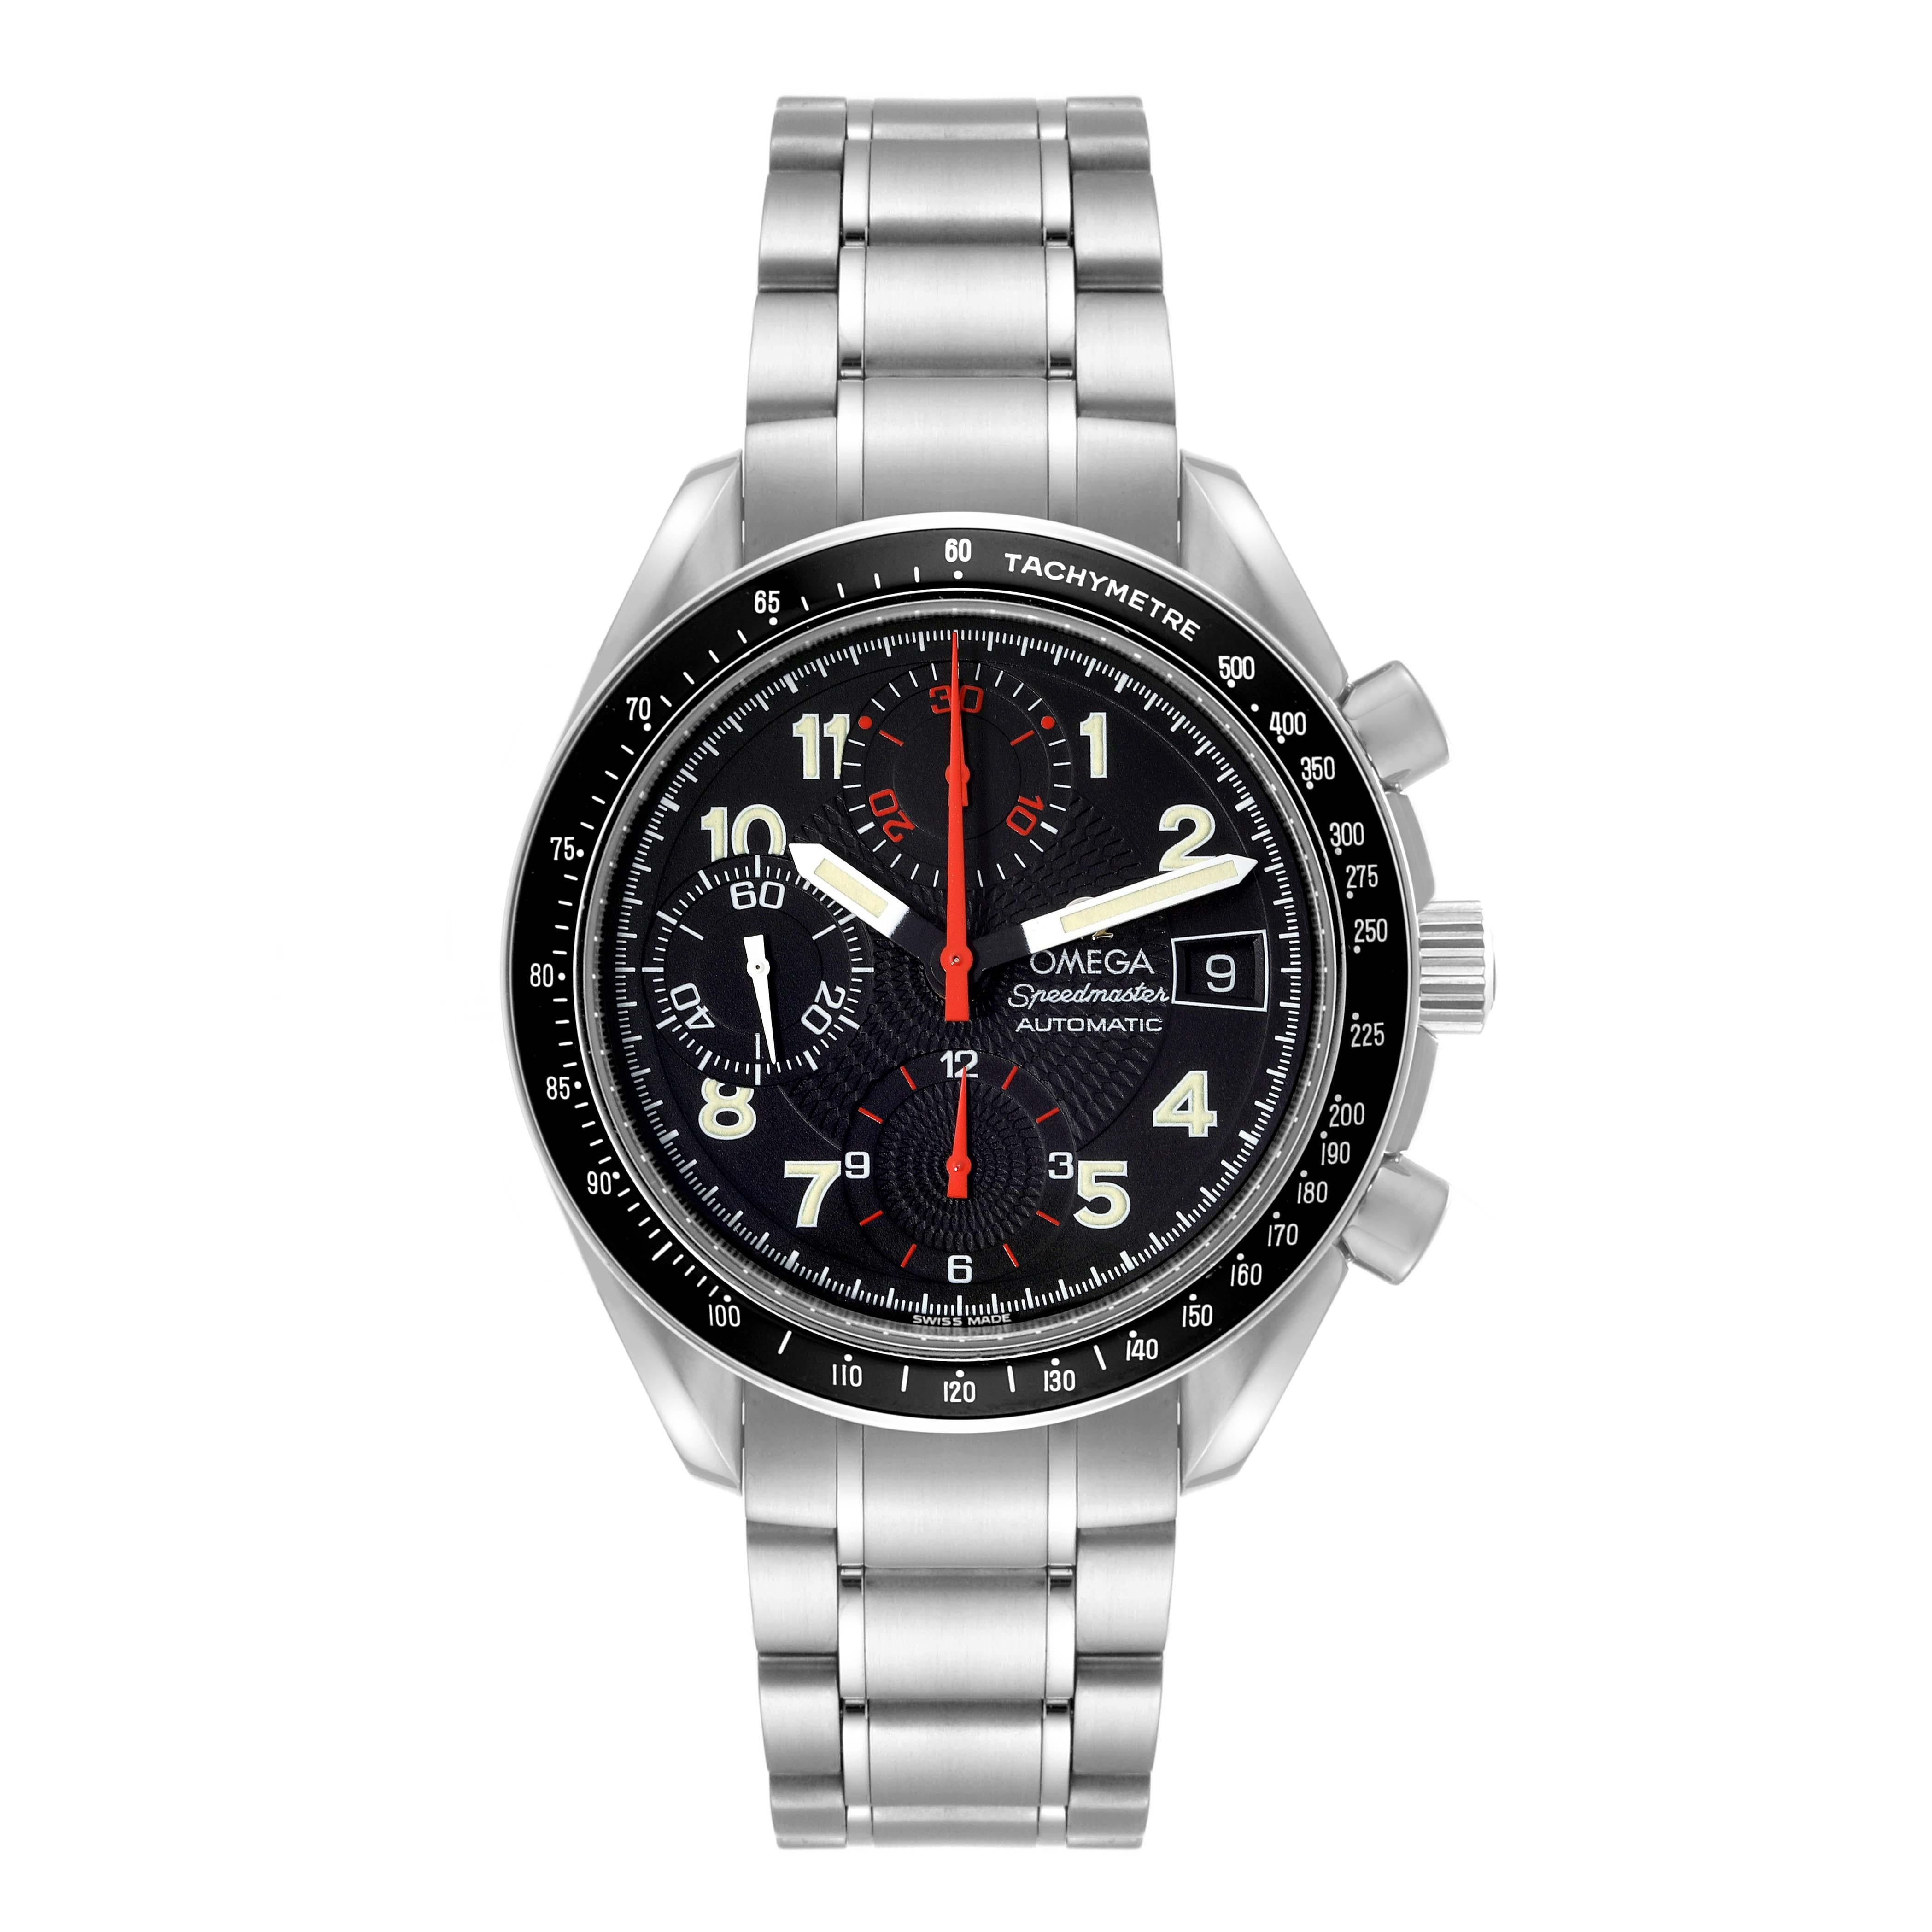 Omega Speedmaster Japanese Market Limited Edition Steel Mens Watch 3513.53.00. Automatic self-winding chronograph movement. Stainless steel case 39.0 mm in diameter. Omega logo on the crown. Stainless steel bezel with black tachymeter insert.